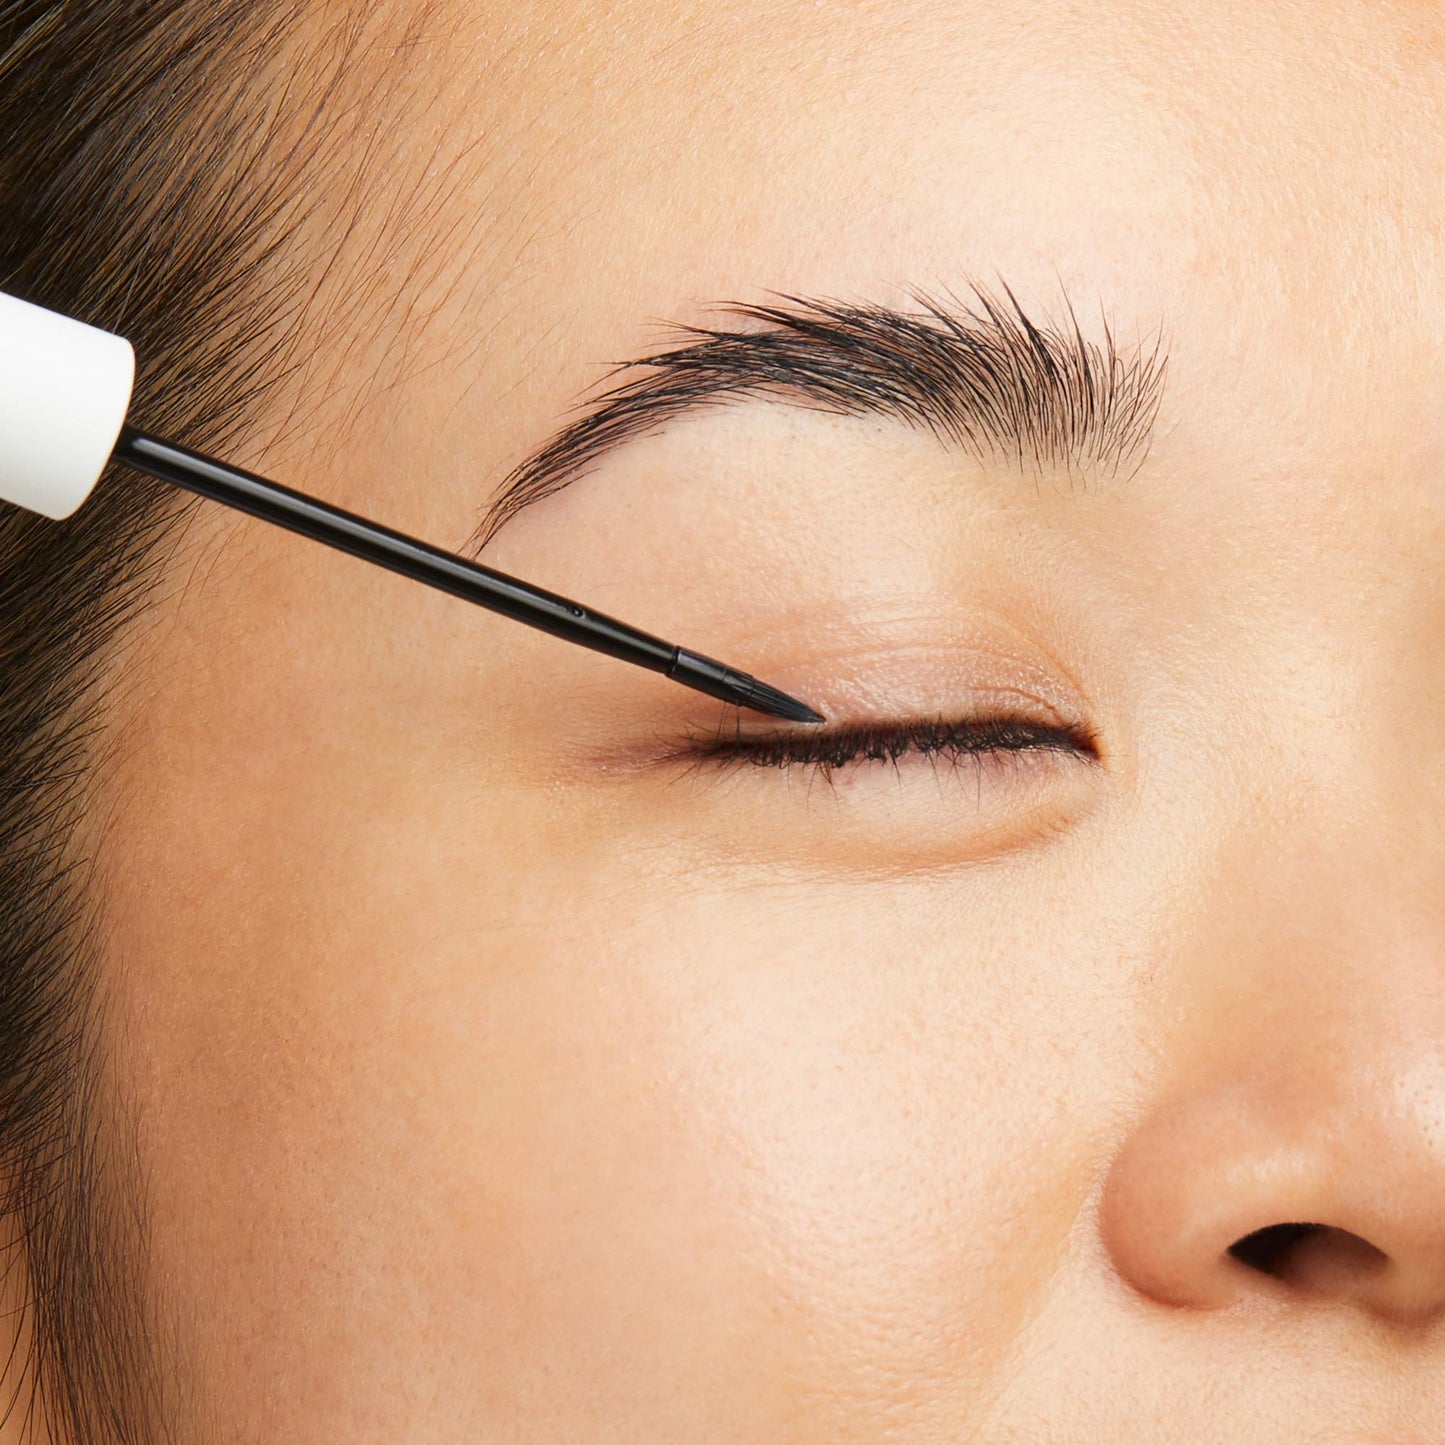 The Ordinary MultiPeptide Lash and Brow Serum